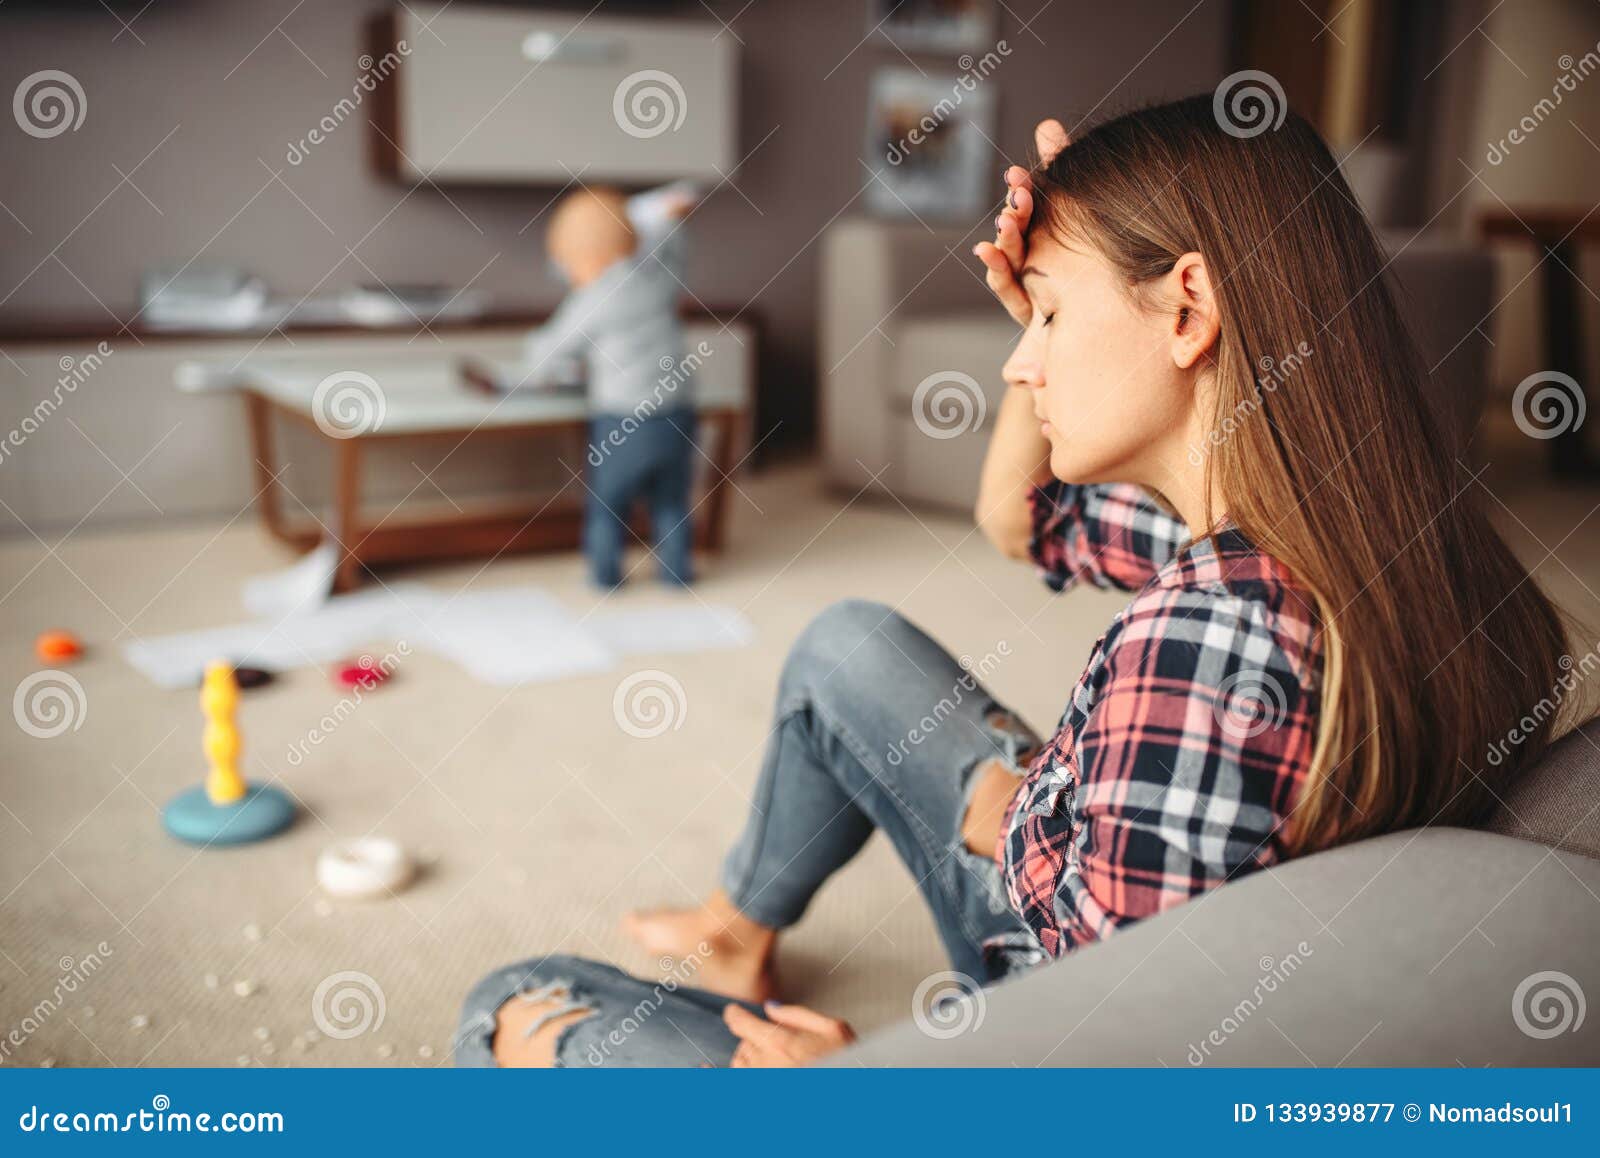 little child playing in room, mother in stress